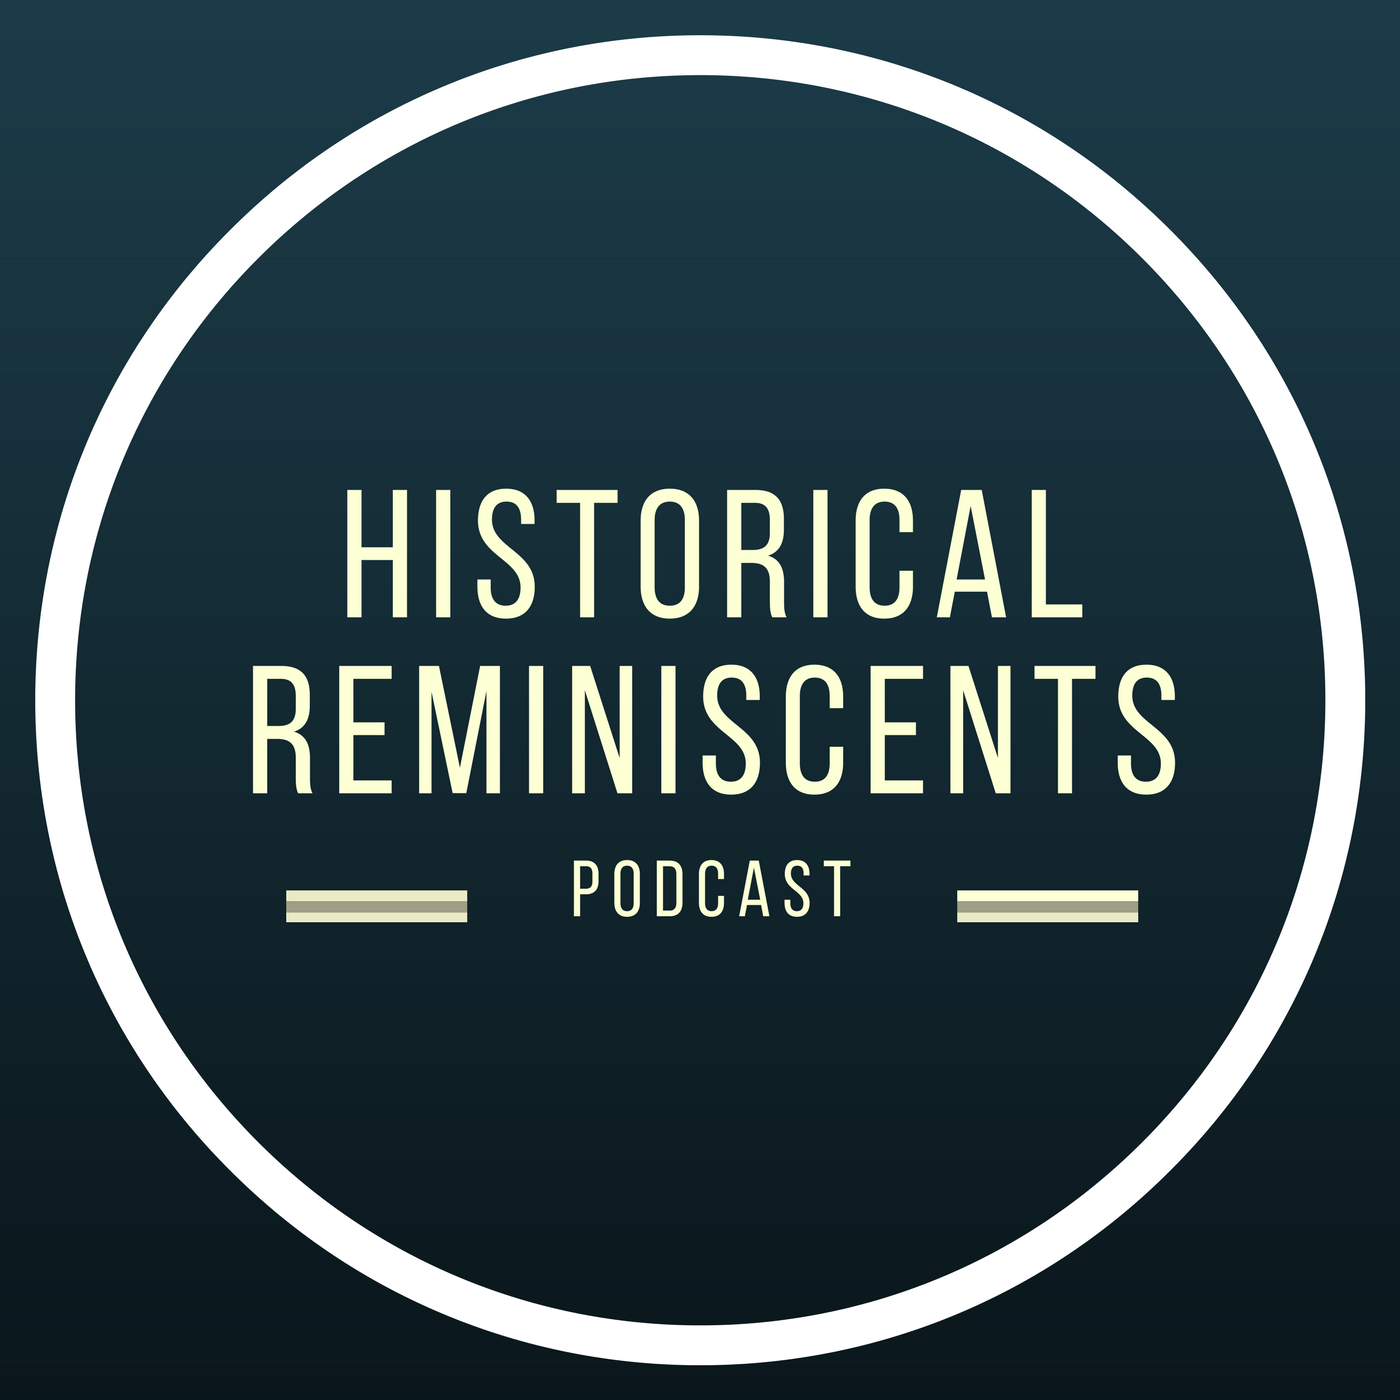 White circle on blue background with text reading "Historical Reminiscents Podcast"